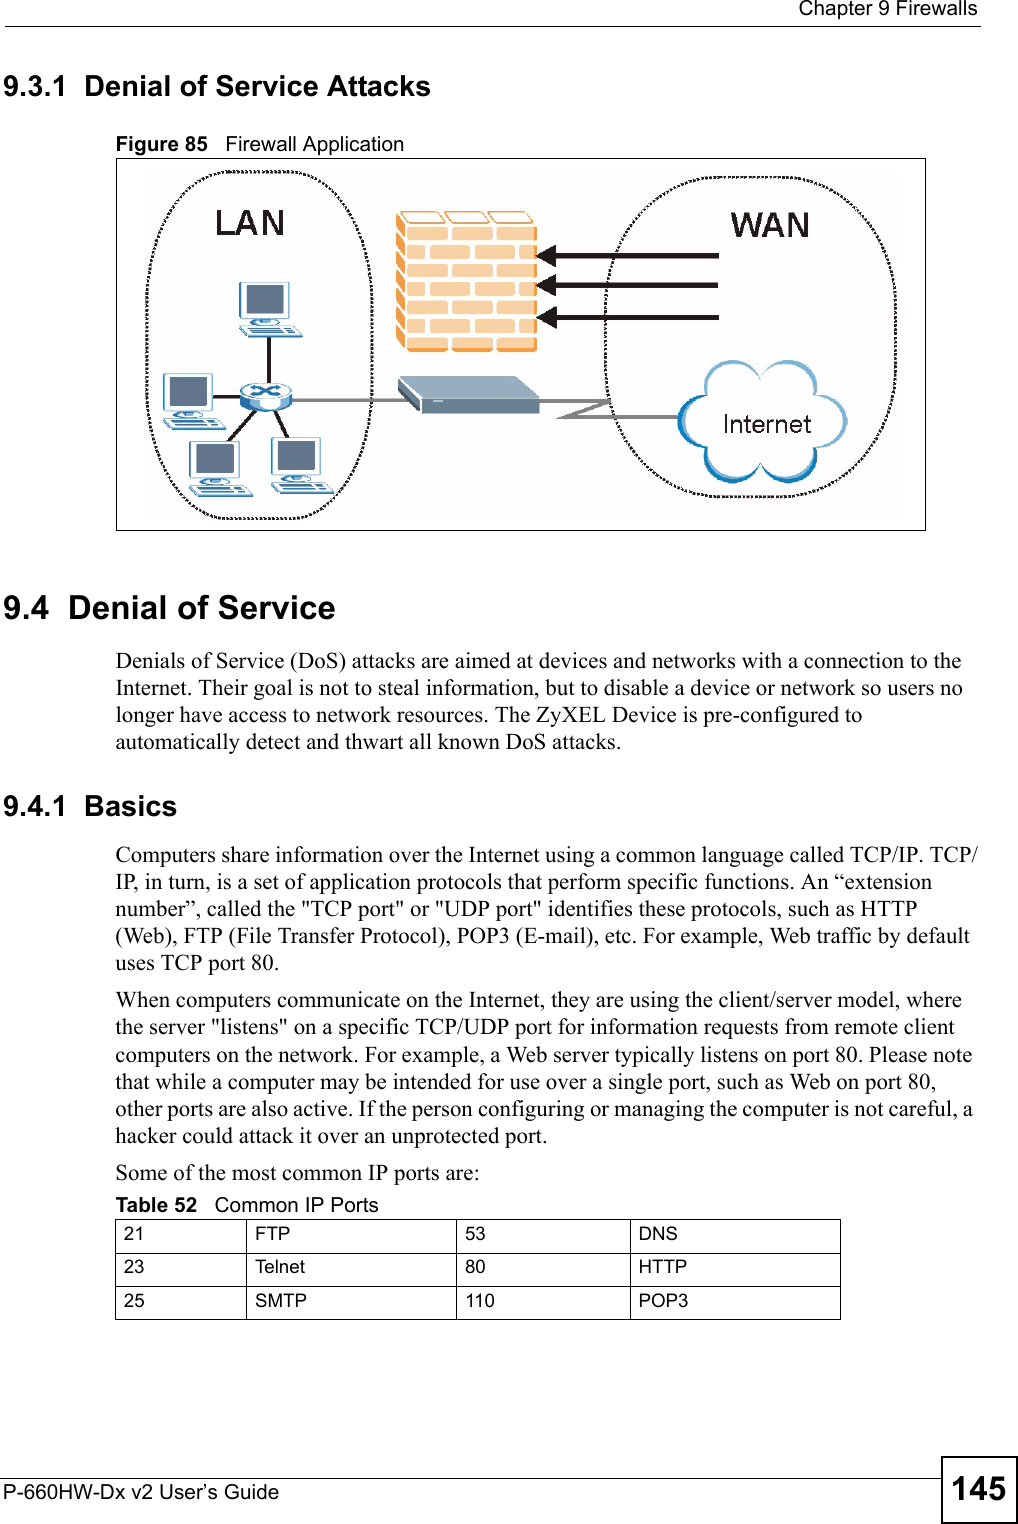  Chapter 9 FirewallsP-660HW-Dx v2 User’s Guide 1459.3.1  Denial of Service AttacksFigure 85   Firewall Application9.4  Denial of ServiceDenials of Service (DoS) attacks are aimed at devices and networks with a connection to the Internet. Their goal is not to steal information, but to disable a device or network so users no longer have access to network resources. The ZyXEL Device is pre-configured to automatically detect and thwart all known DoS attacks.9.4.1  BasicsComputers share information over the Internet using a common language called TCP/IP. TCP/IP, in turn, is a set of application protocols that perform specific functions. An “extension number”, called the &quot;TCP port&quot; or &quot;UDP port&quot; identifies these protocols, such as HTTP (Web), FTP (File Transfer Protocol), POP3 (E-mail), etc. For example, Web traffic by default uses TCP port 80. When computers communicate on the Internet, they are using the client/server model, where the server &quot;listens&quot; on a specific TCP/UDP port for information requests from remote client computers on the network. For example, a Web server typically listens on port 80. Please note that while a computer may be intended for use over a single port, such as Web on port 80, other ports are also active. If the person configuring or managing the computer is not careful, a hacker could attack it over an unprotected port. Some of the most common IP ports are: Table 52   Common IP Ports21 FTP 53 DNS23 Telnet 80 HTTP25 SMTP 110 POP3